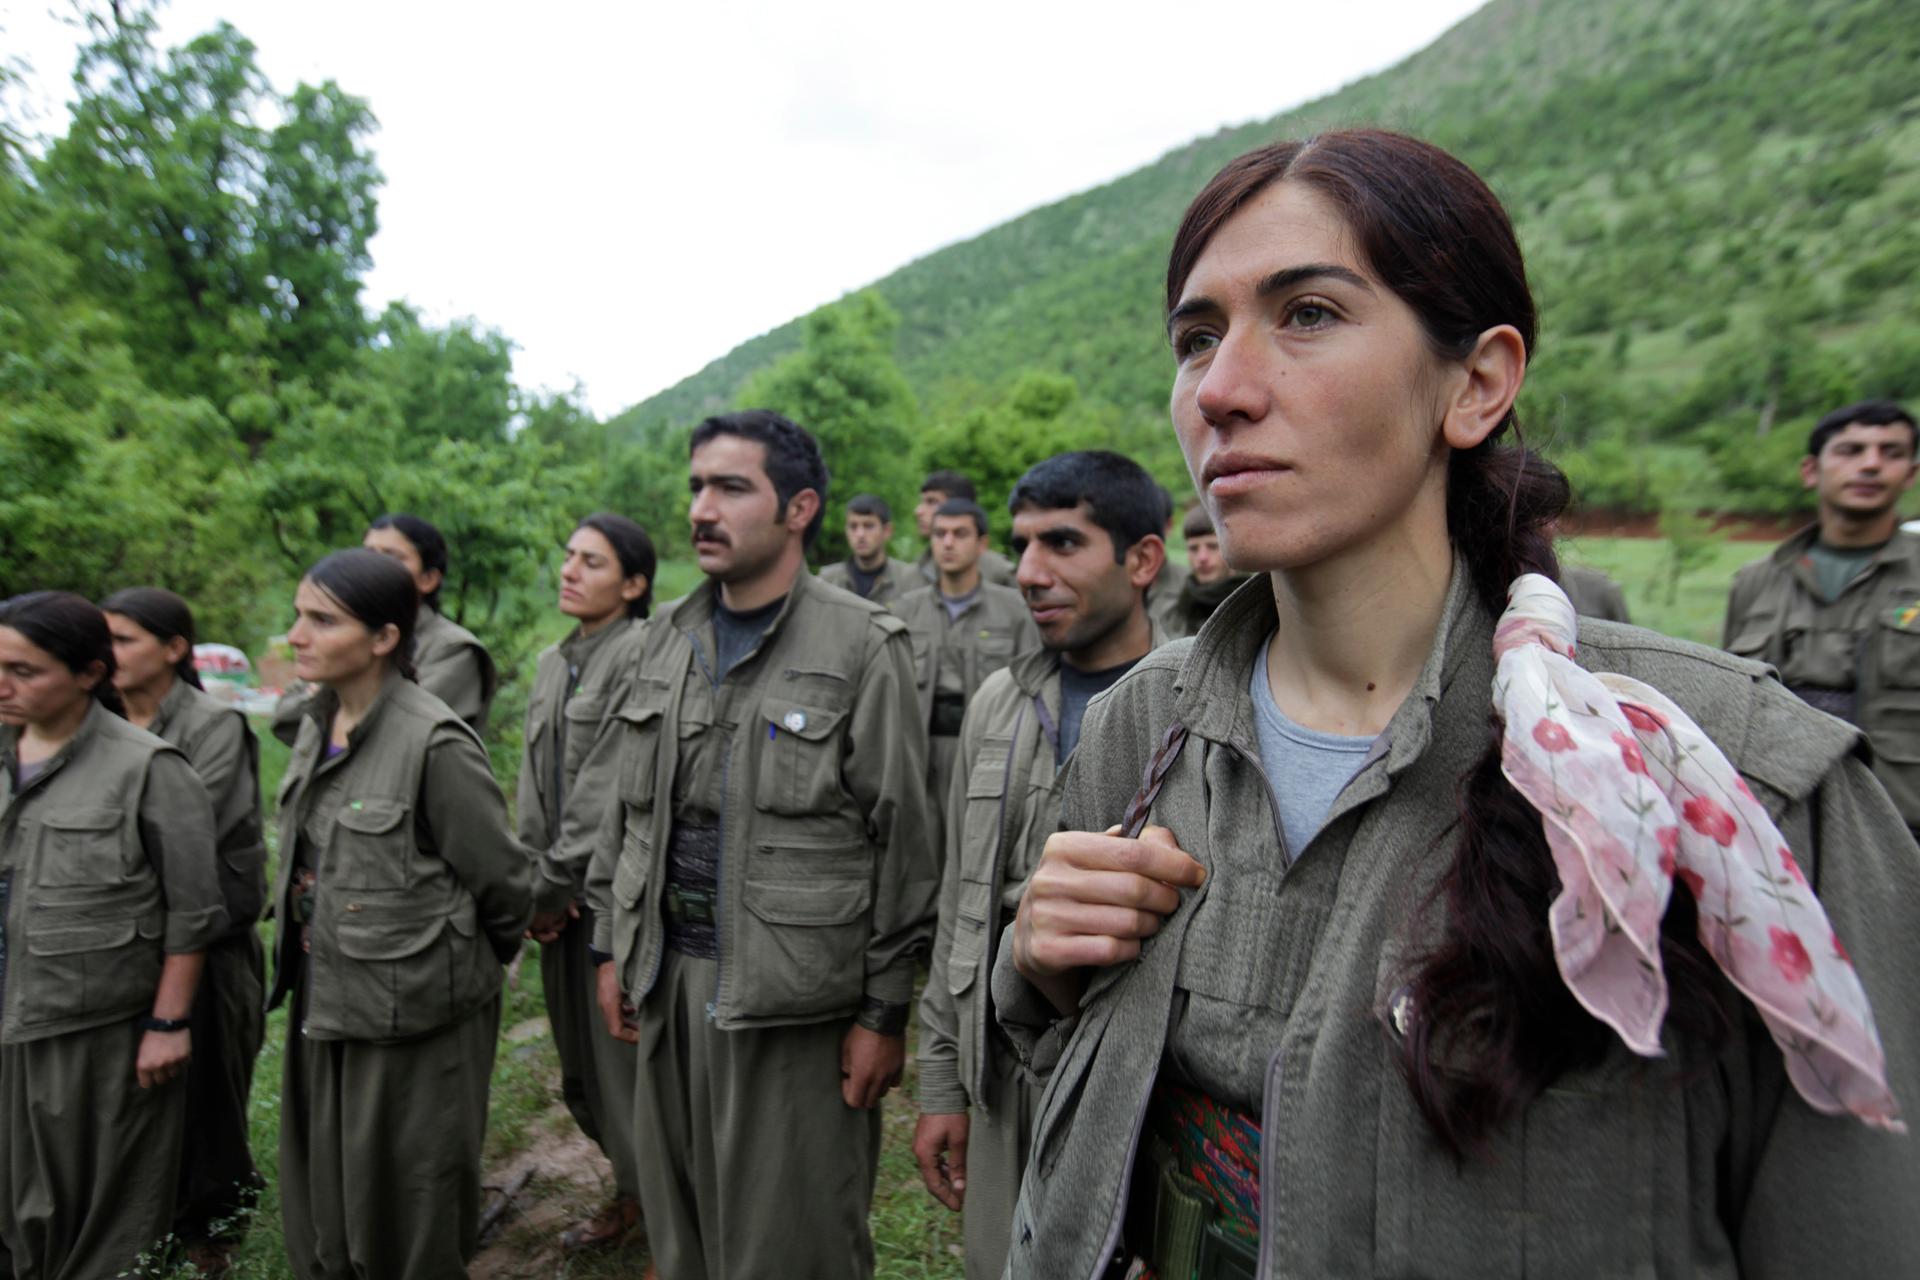 Fighters from the Kurdistan Workers Party, or PKK, stand in formation in northern Iraq on May 14, 2013.